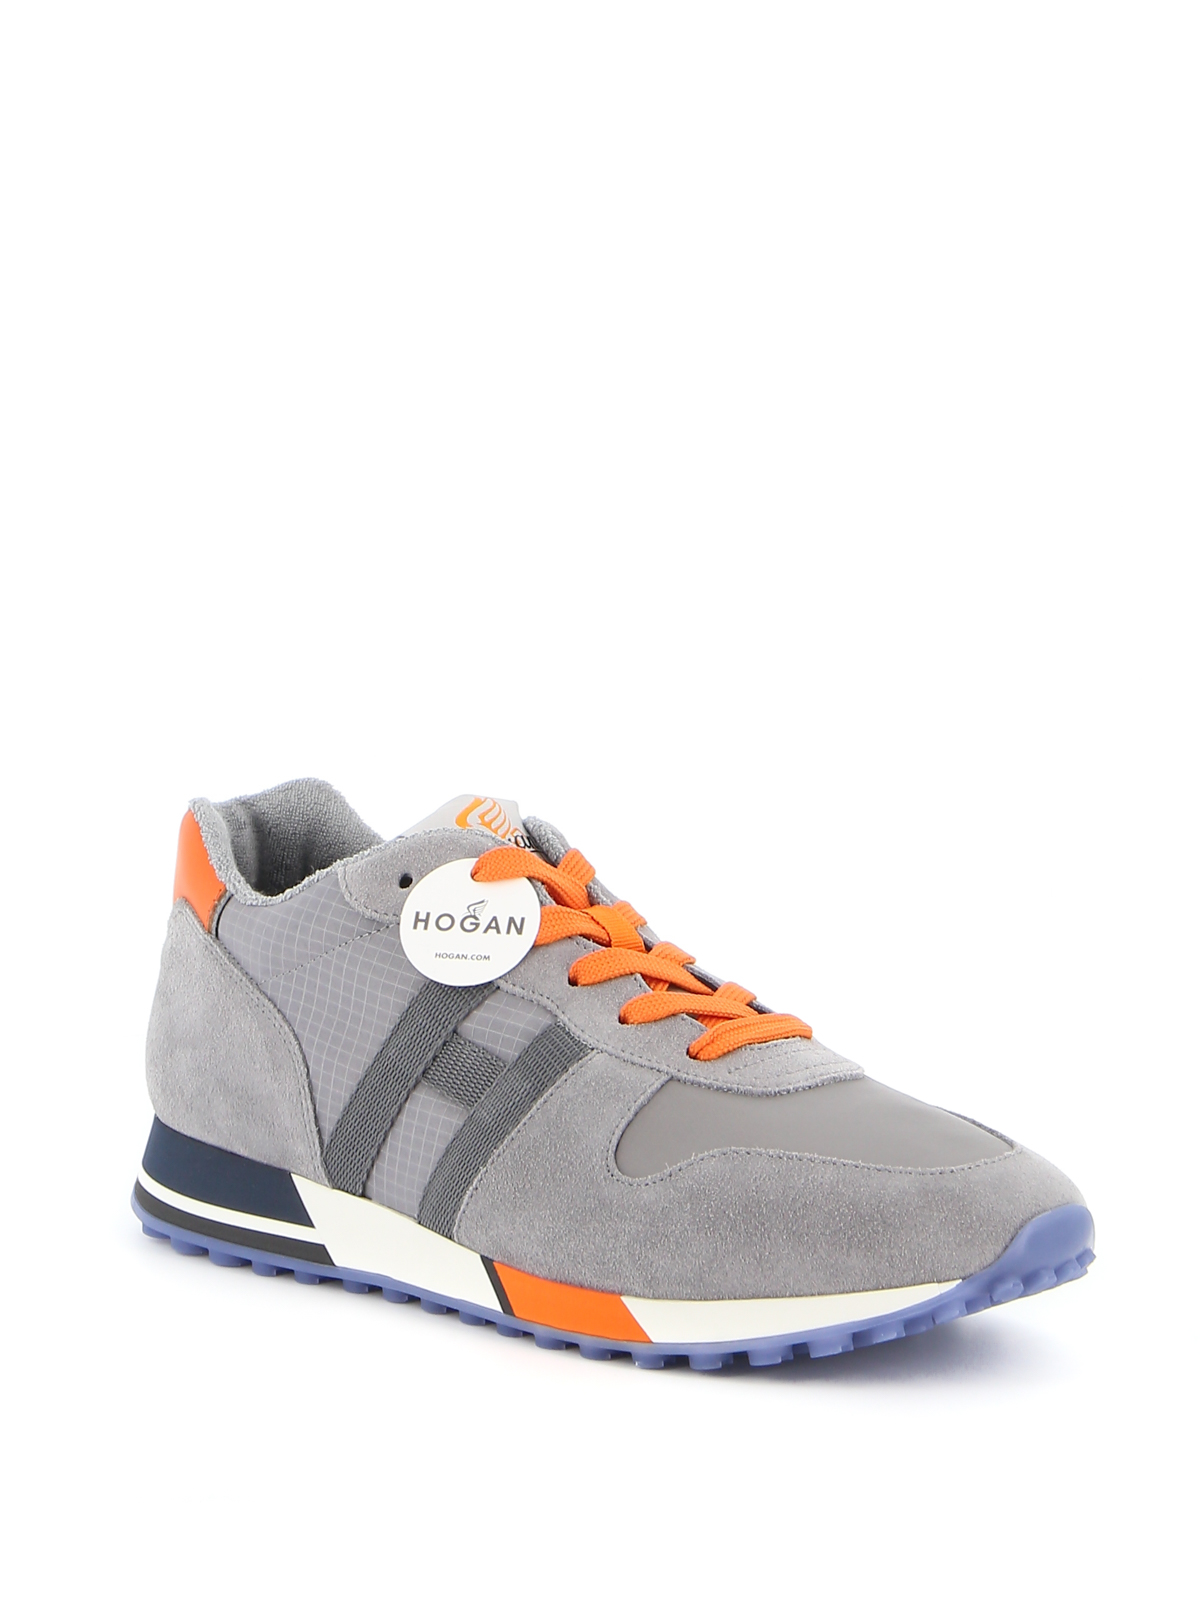 Trainers Hogan - H383 sneakers - HXM3830AN51N4X50C6 | Shop online at iKRIX